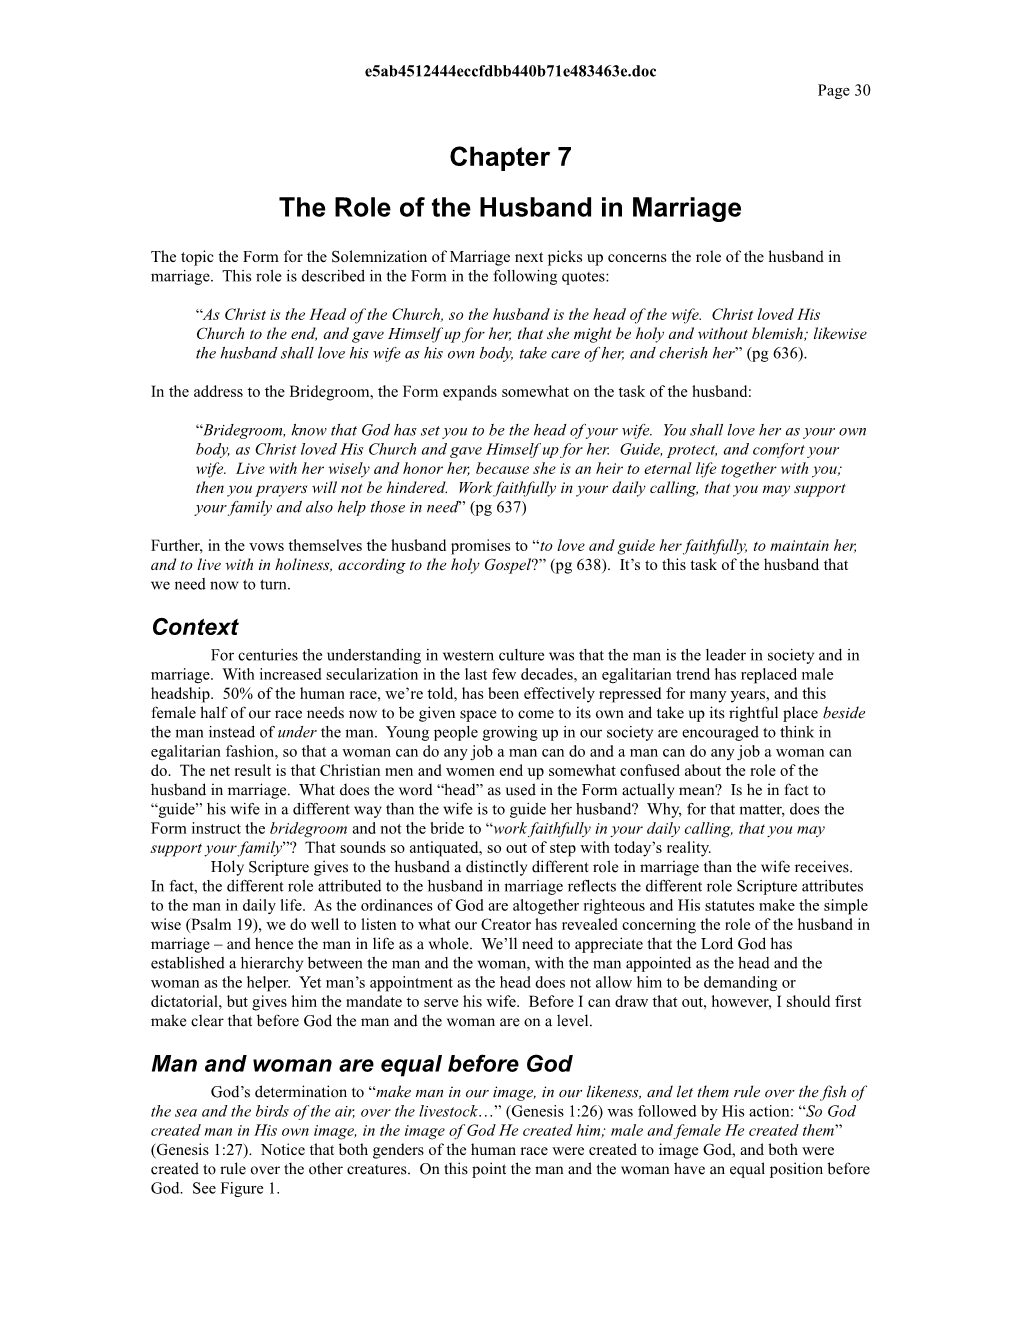 The Role of the Husband in Marriage